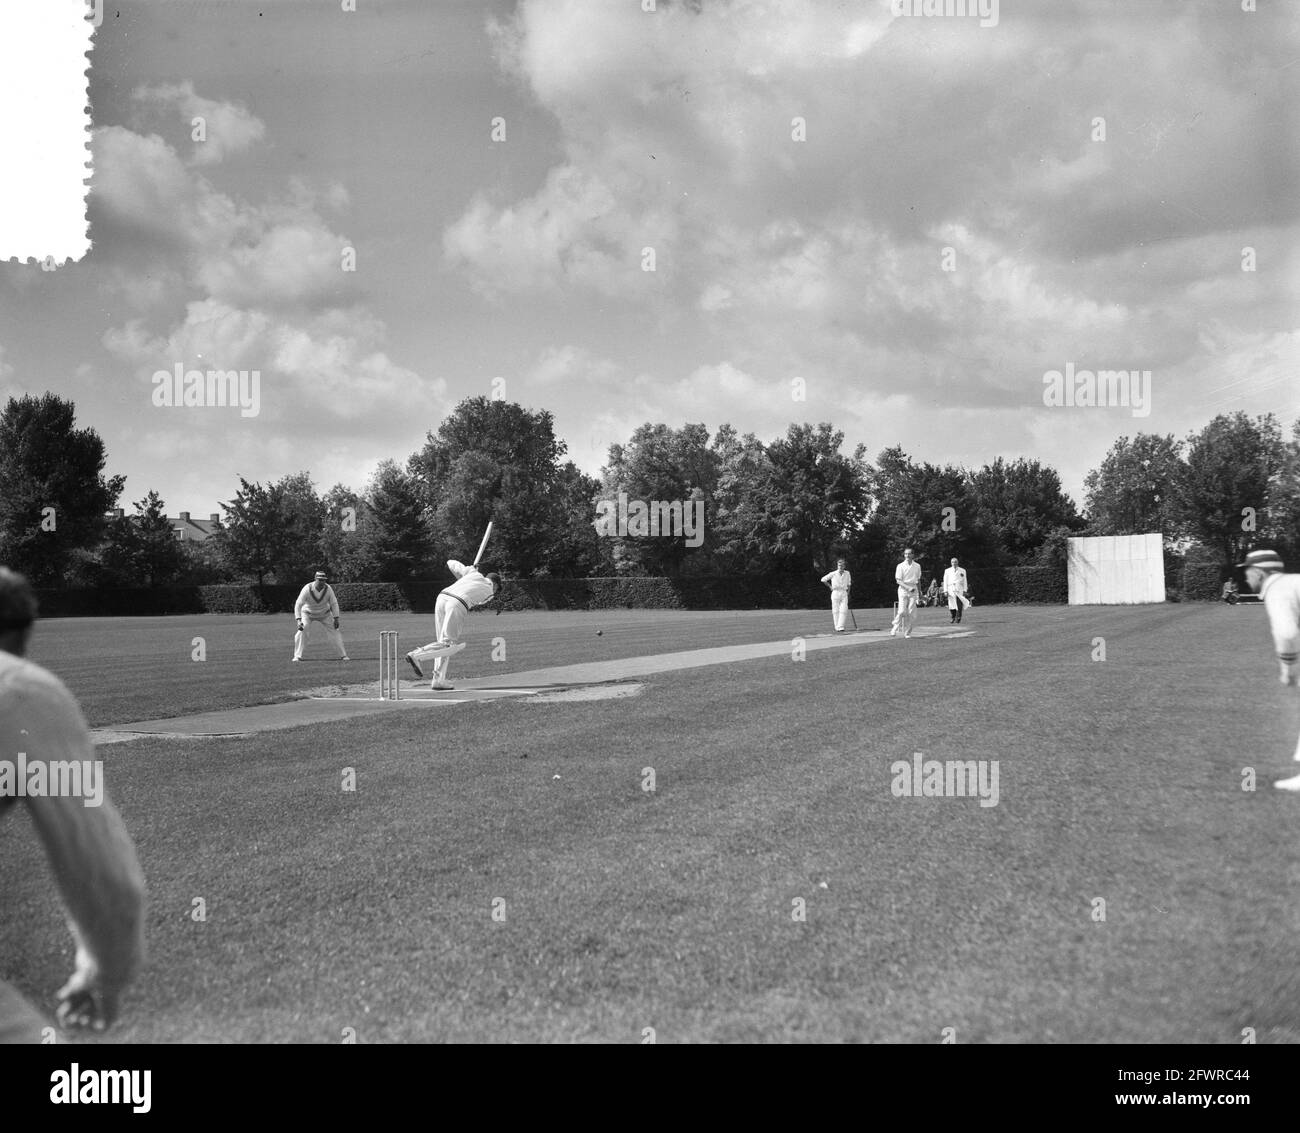 Cricket Dutch national team against Free Foresters Amstelveen, 14 August 1956, CRICKET, The Netherlands, 20th century press agency photo, news to remember, documentary, historic photography 1945-1990, visual stories, human history of the Twentieth Century, capturing moments in time Stock Photo